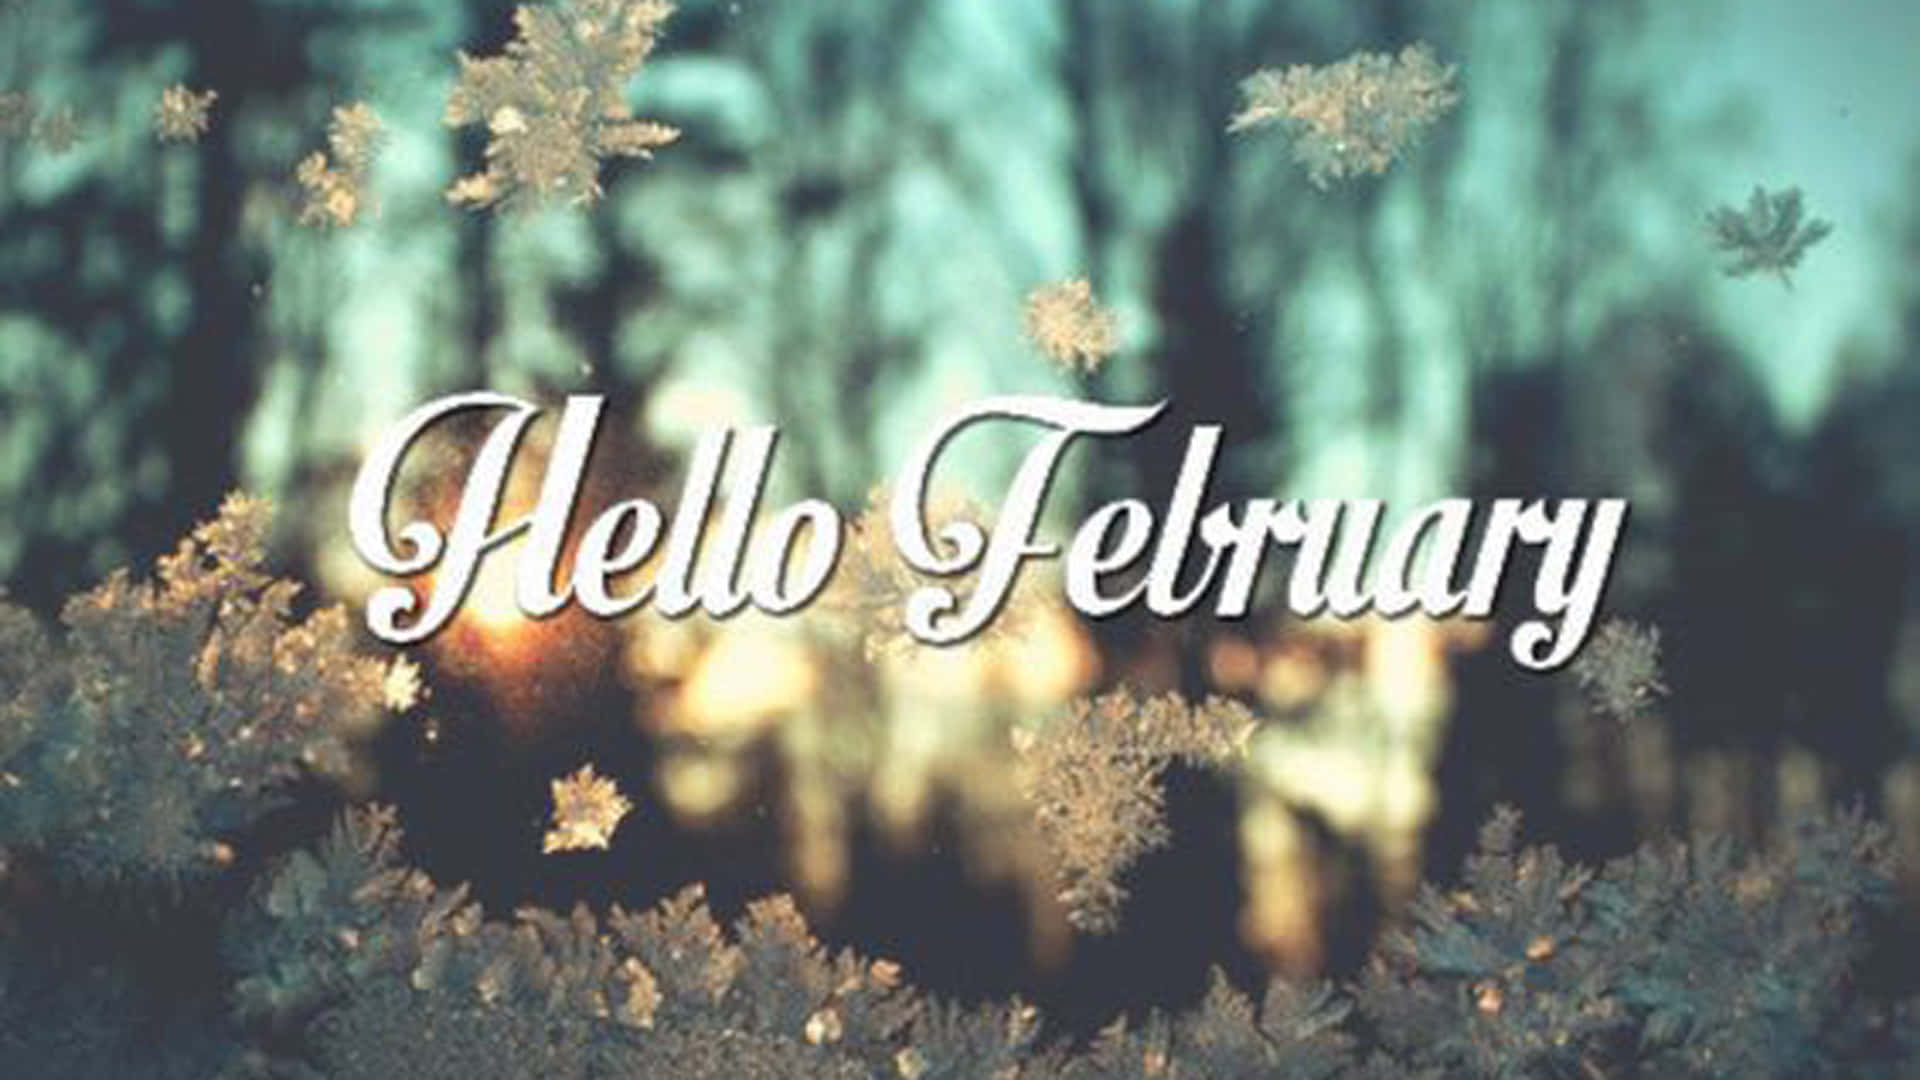 Welcome February! Wallpaper